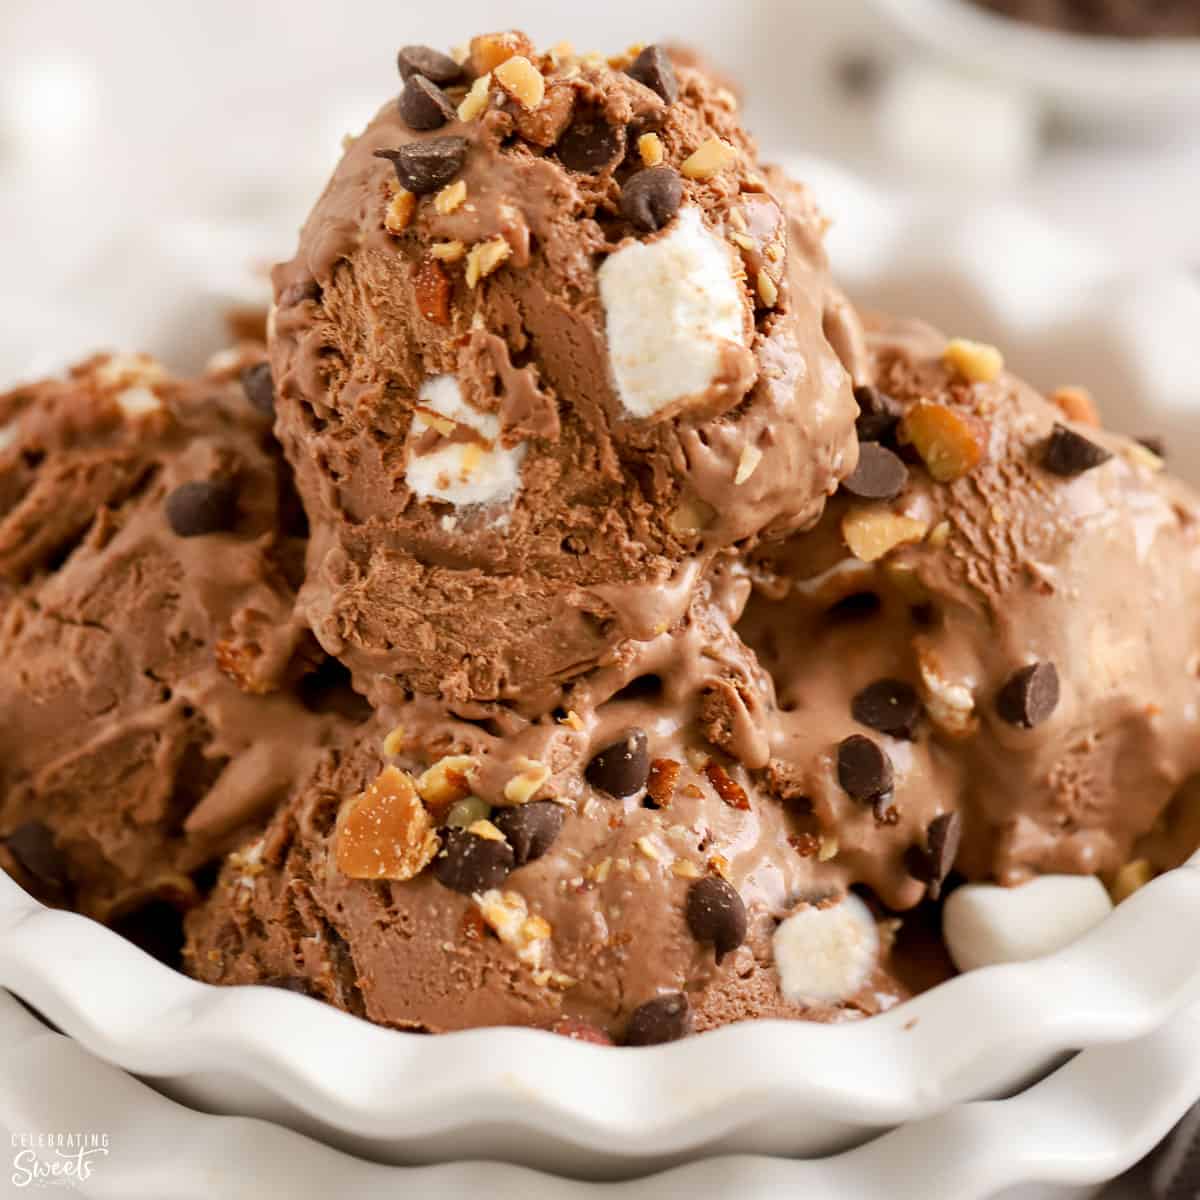 Which Brand Has the Best Rocky Road Ice Cream